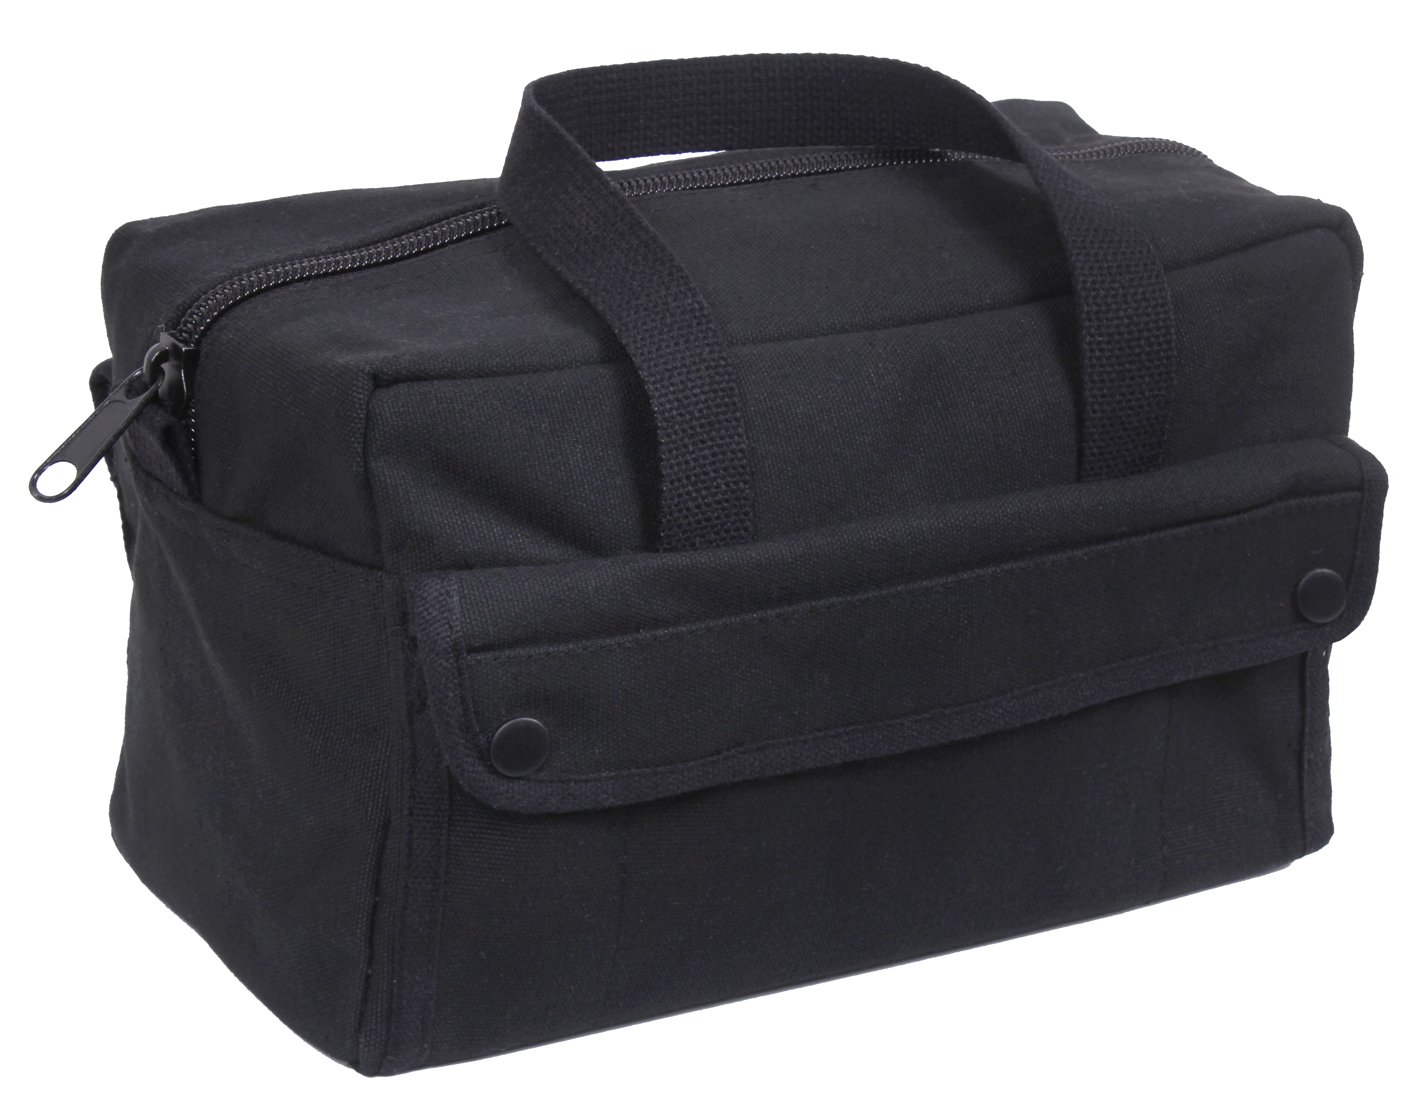 Book Cover Rothco G.I. Style Mechanic’s Tool Bag – Heavy-Duty Canvas Material – Wide Mouth Opening with Full-Length Zipper – Hard Bottom Insert Black